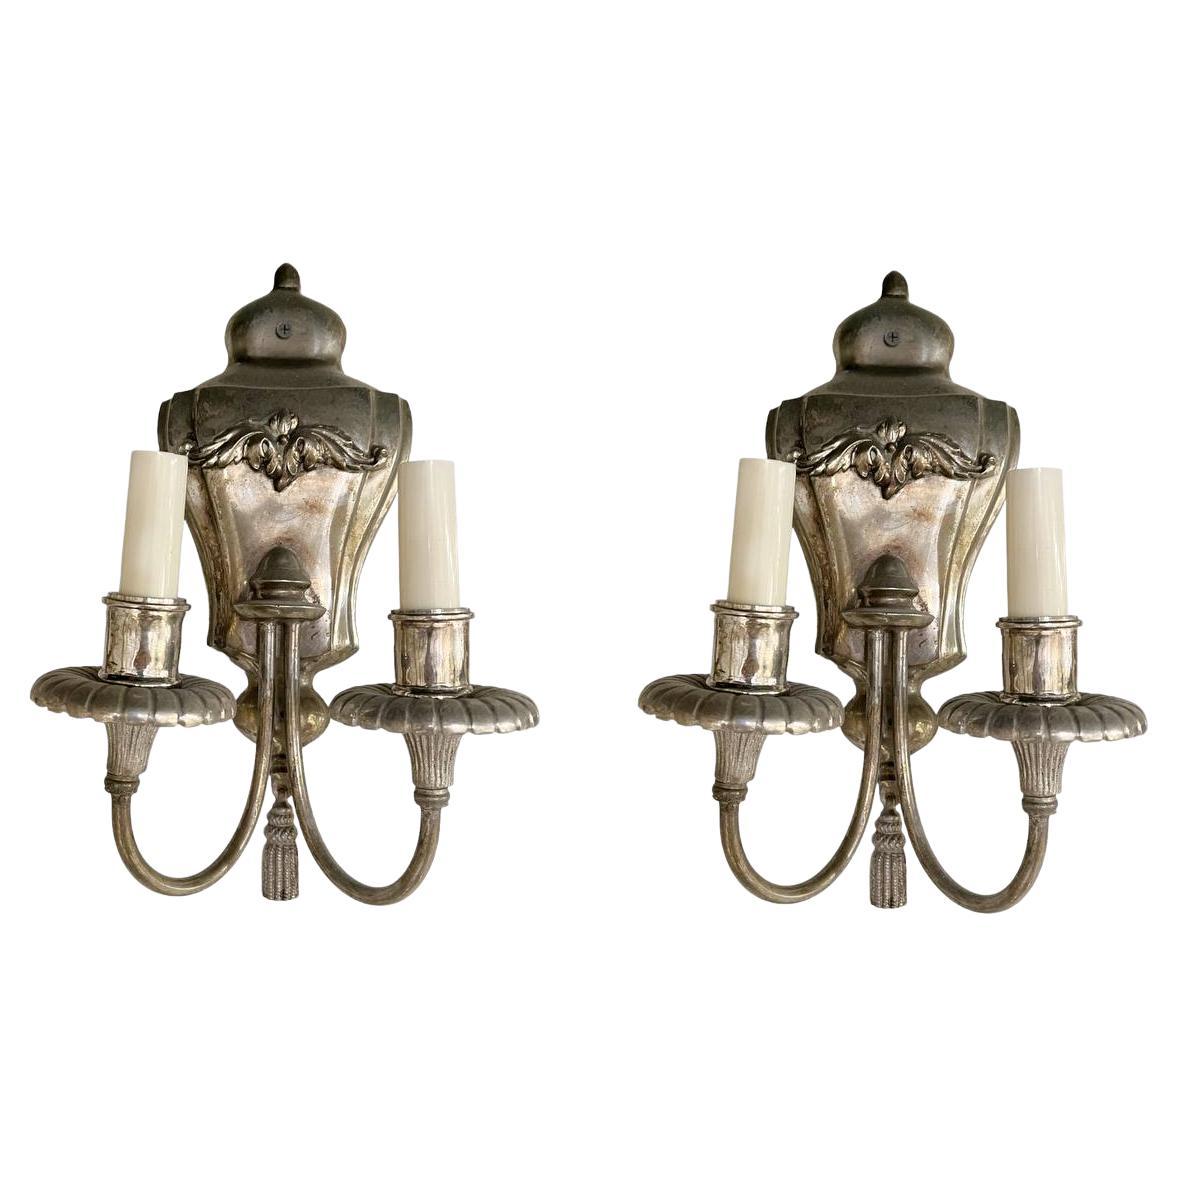 1930's English Silver Plated Sconces mit 2 Lights